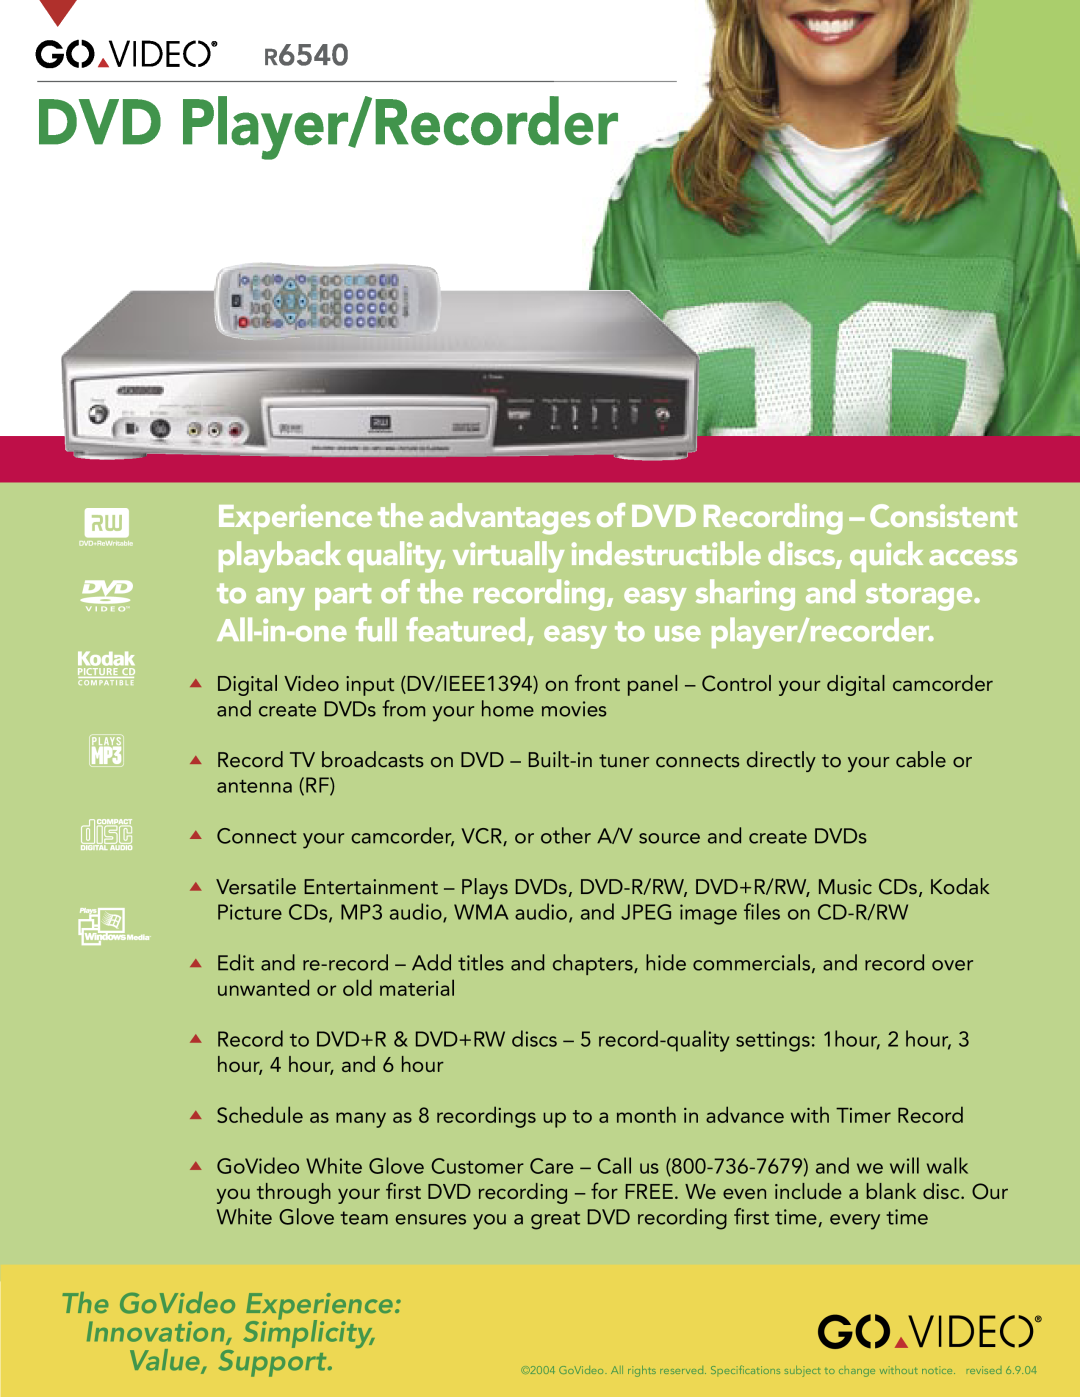 Go-Video R6540 specifications DVD Player/Recorder, All-in-one full featured, easy to use player/recorder 